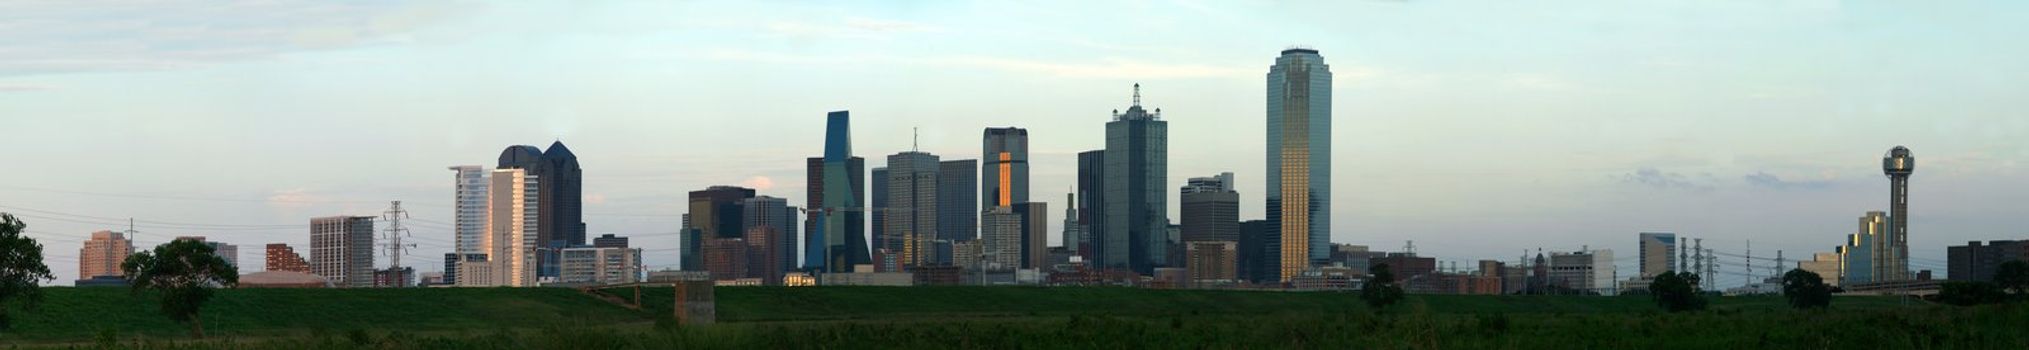 A section of buildings in the Dallas Texas Skyline at dusk.